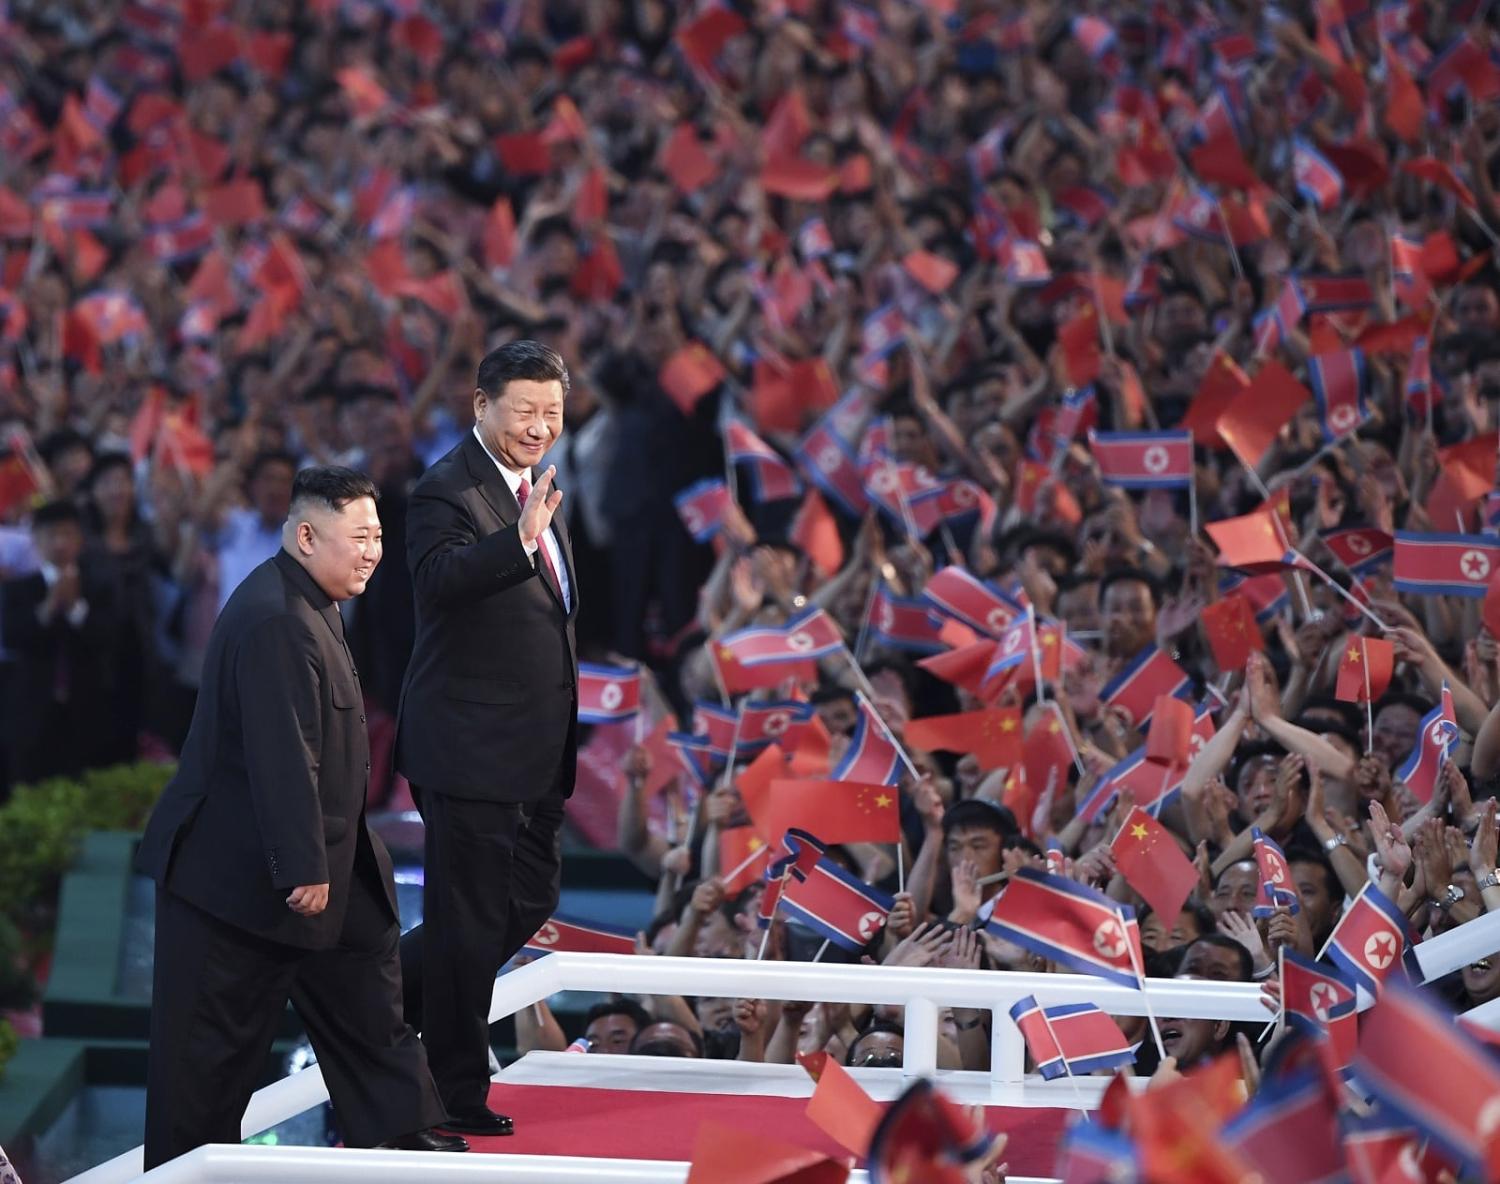 North Korean leader Kim Jong-un (L) and Chinese President Xi Jinping (R) watch a performance at the May Day Stadium in Pyongyang on 20 June 2019 (Yan Yan/Xinhua via Getty Images)